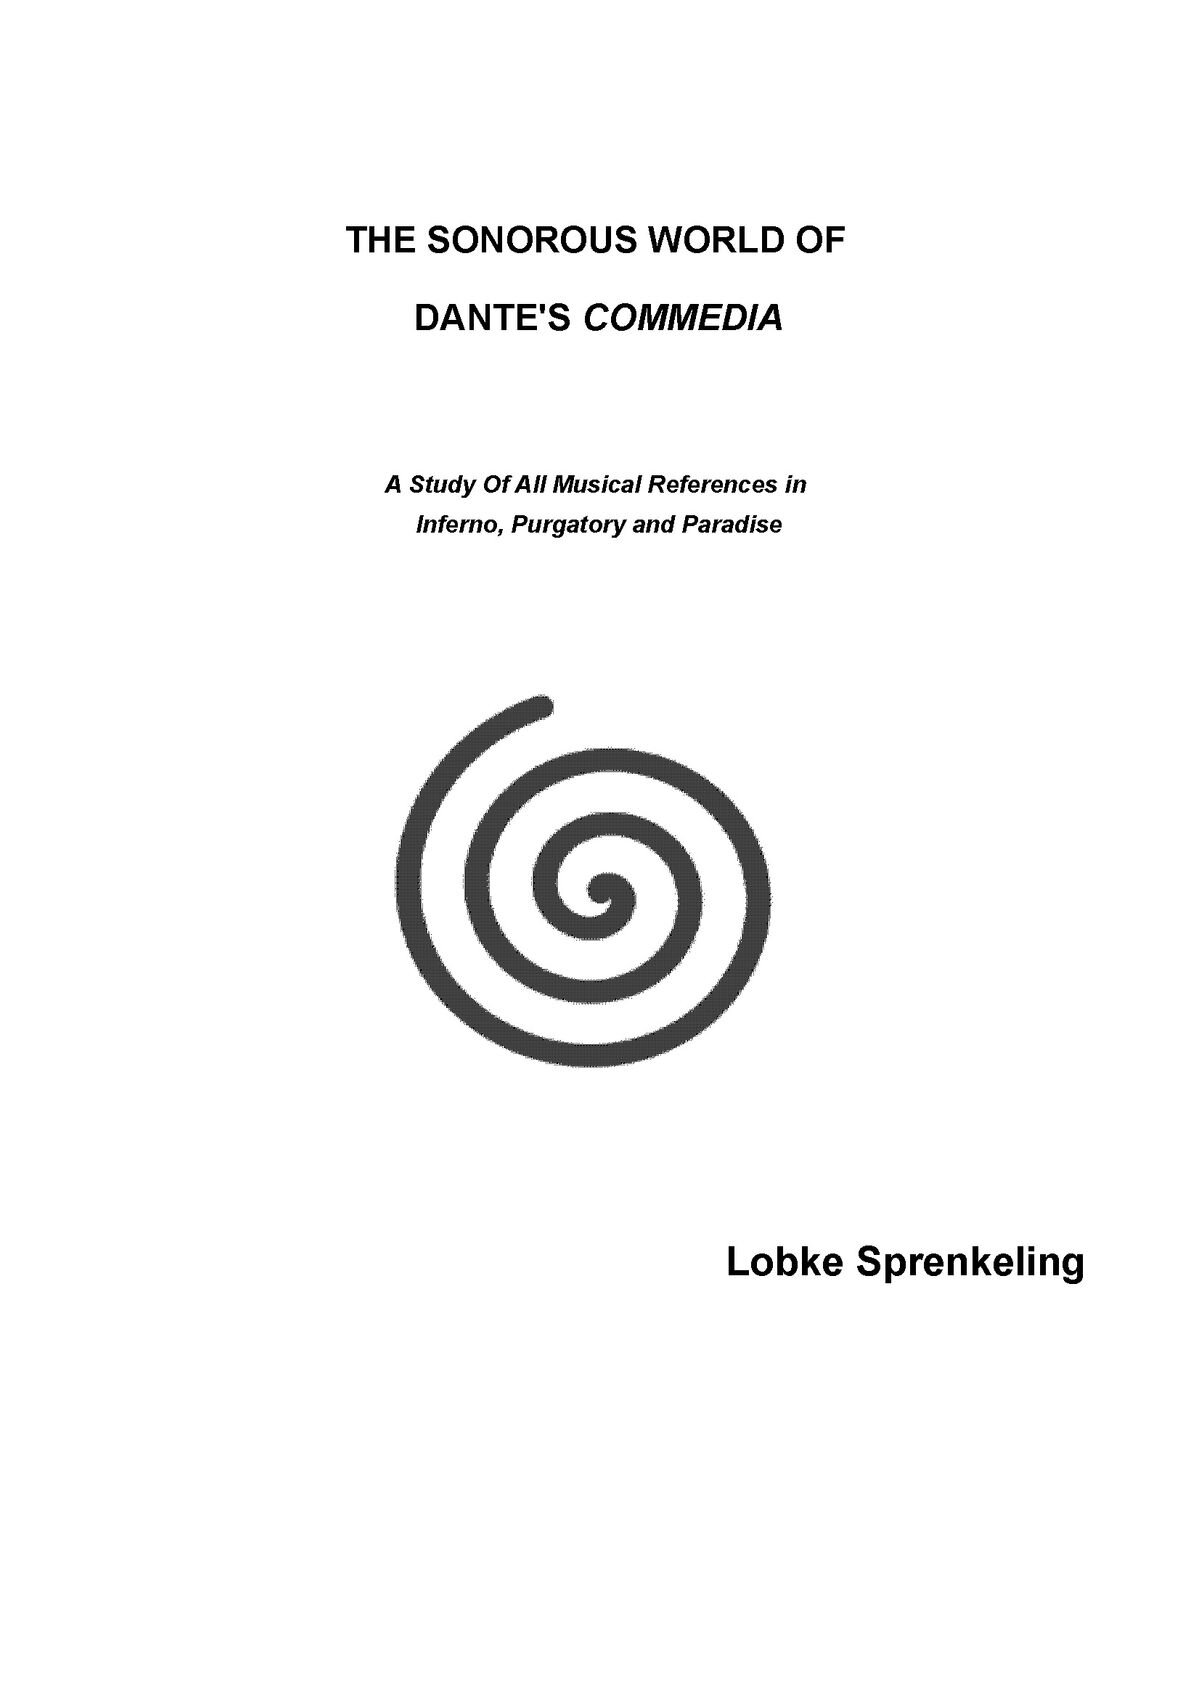 Book "The Sonorous World of Dante's Commedia" (2016) - other eBook formats